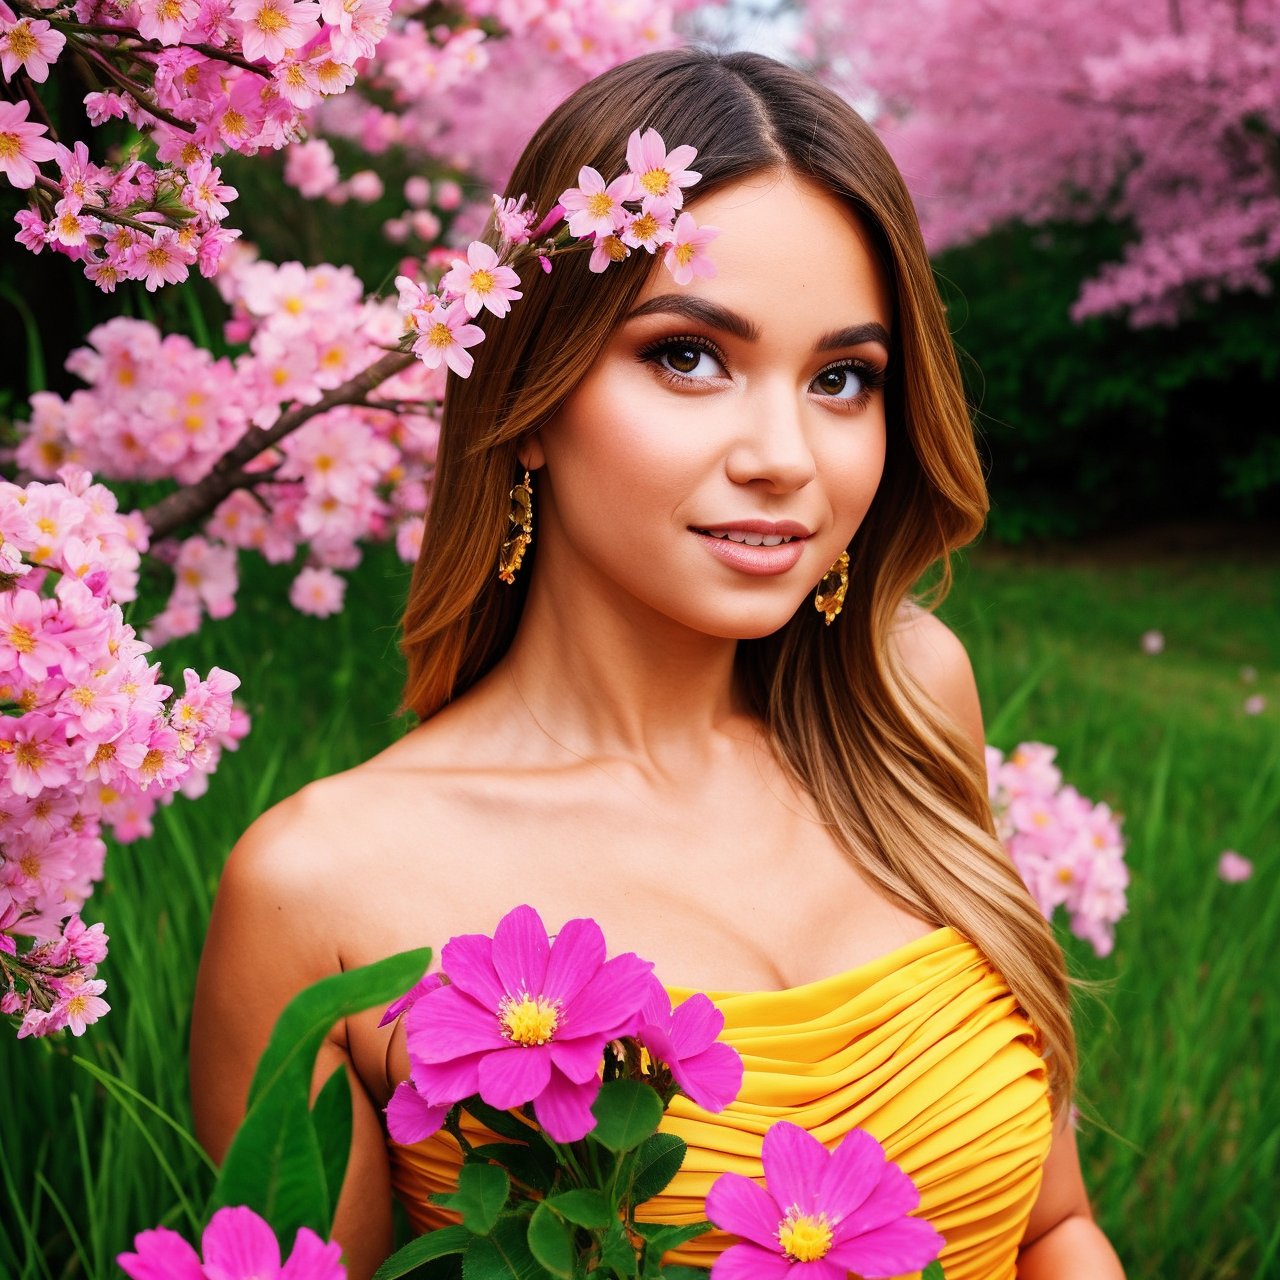 masterpice, (best quality), ((best detailed)), depth of field, a beautiful girl, beautiful face, nature, spirit, blossom, colorful landscape, flowers, butterflys, glowing dress, elements